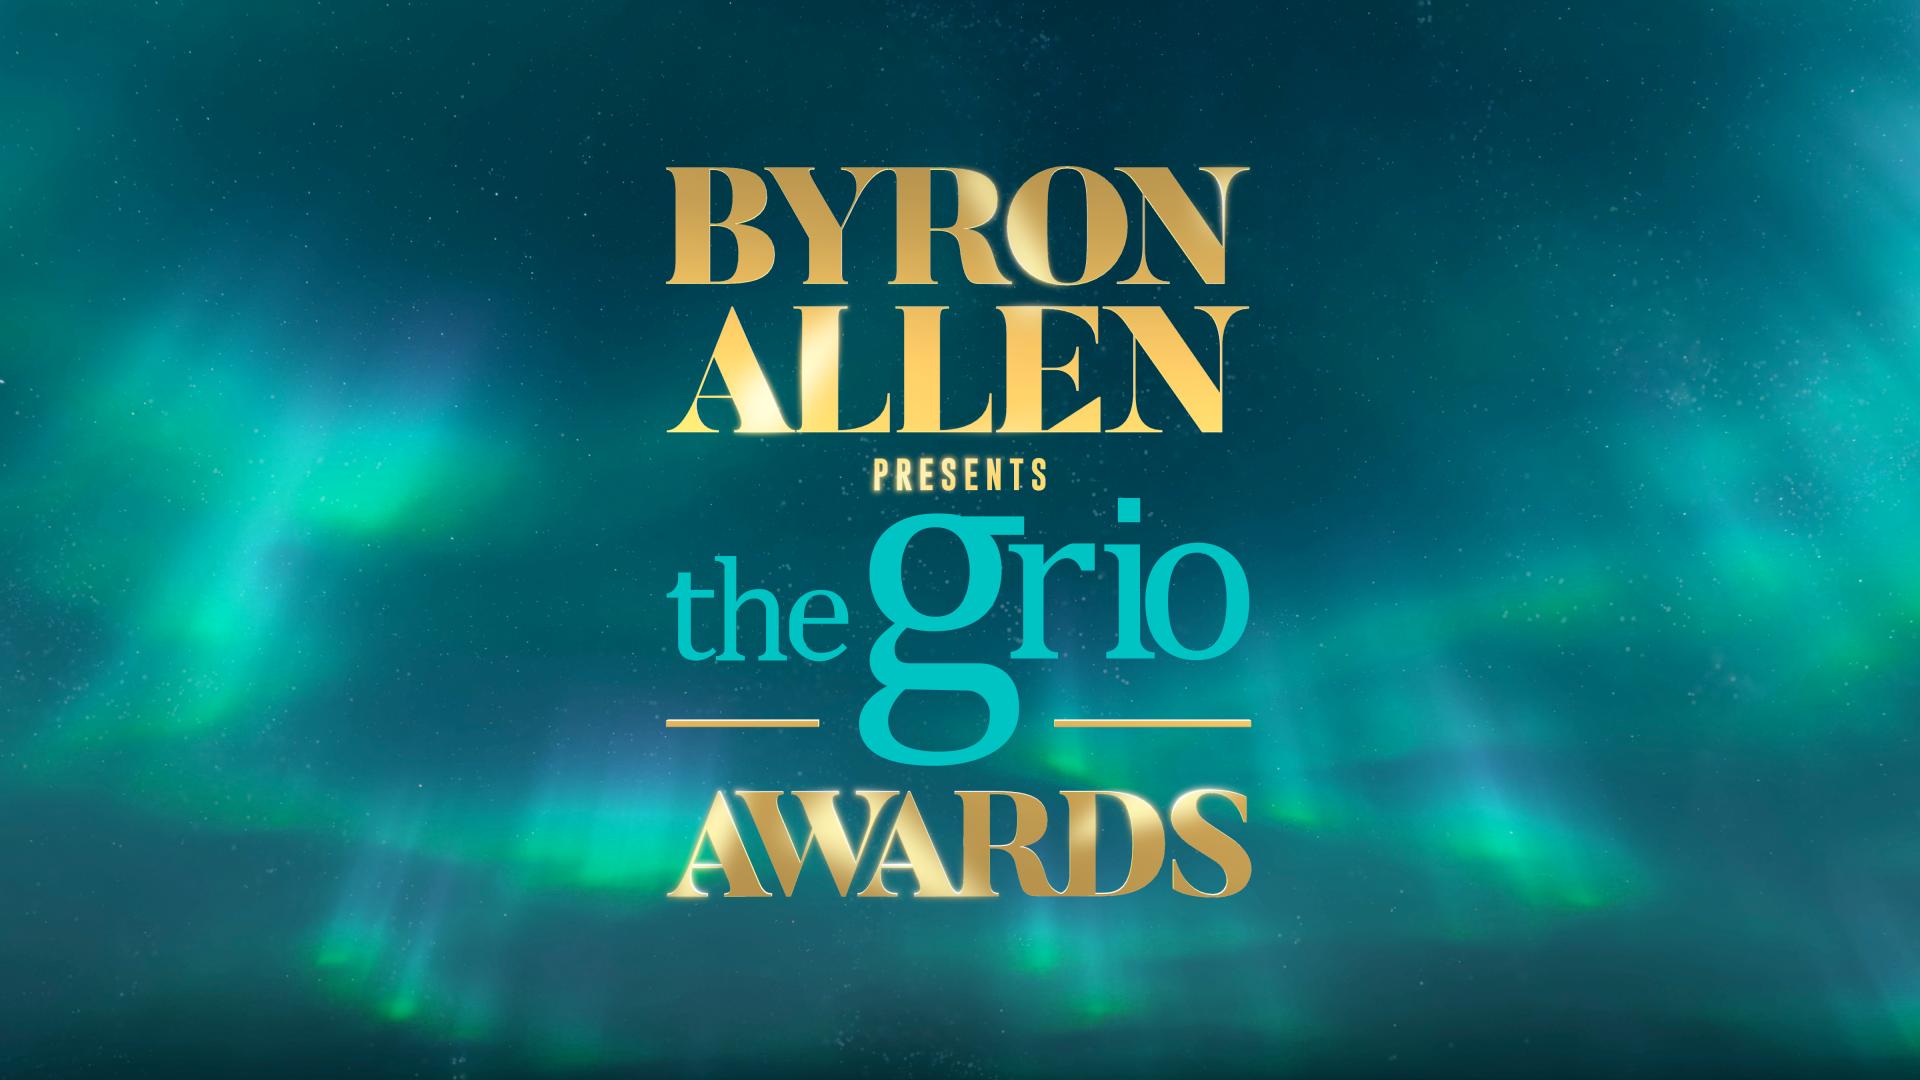 Byron Allen Presents TheGrio Awards Free Live Stream CBS Online How to Watch and Stream Major